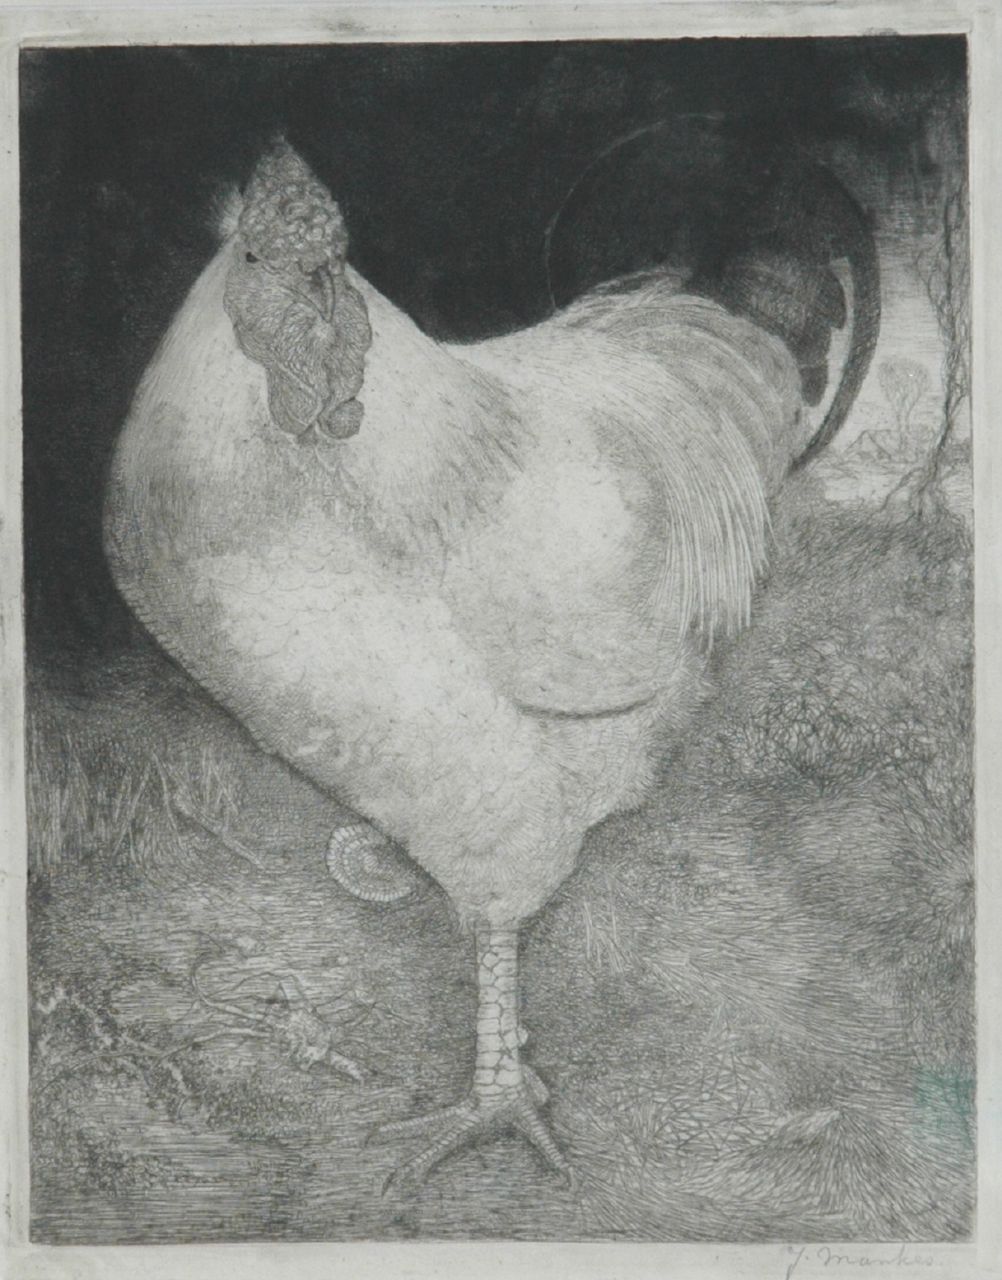 Mankes J.  | Jan Mankes, A rooster, etching on paper 26.0 x 21.0 cm, signed l.r. and painted circa 1917